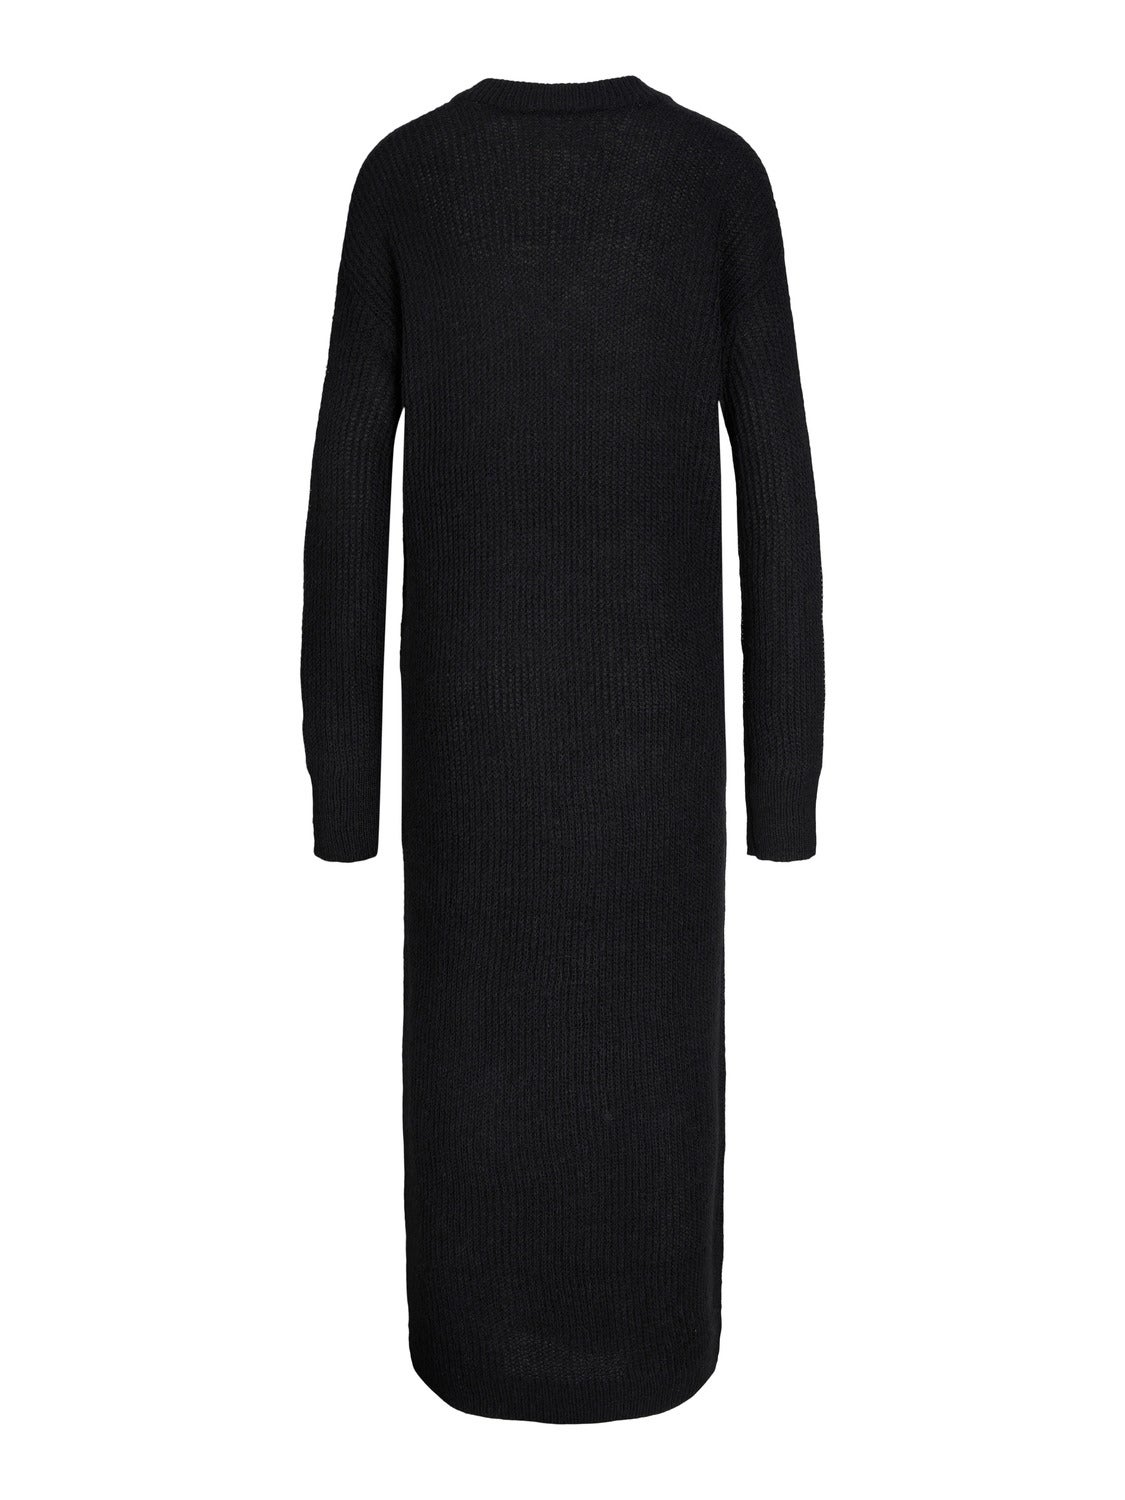 JJXX® with 30% | JXNICOLLE Knitted Dress discount!